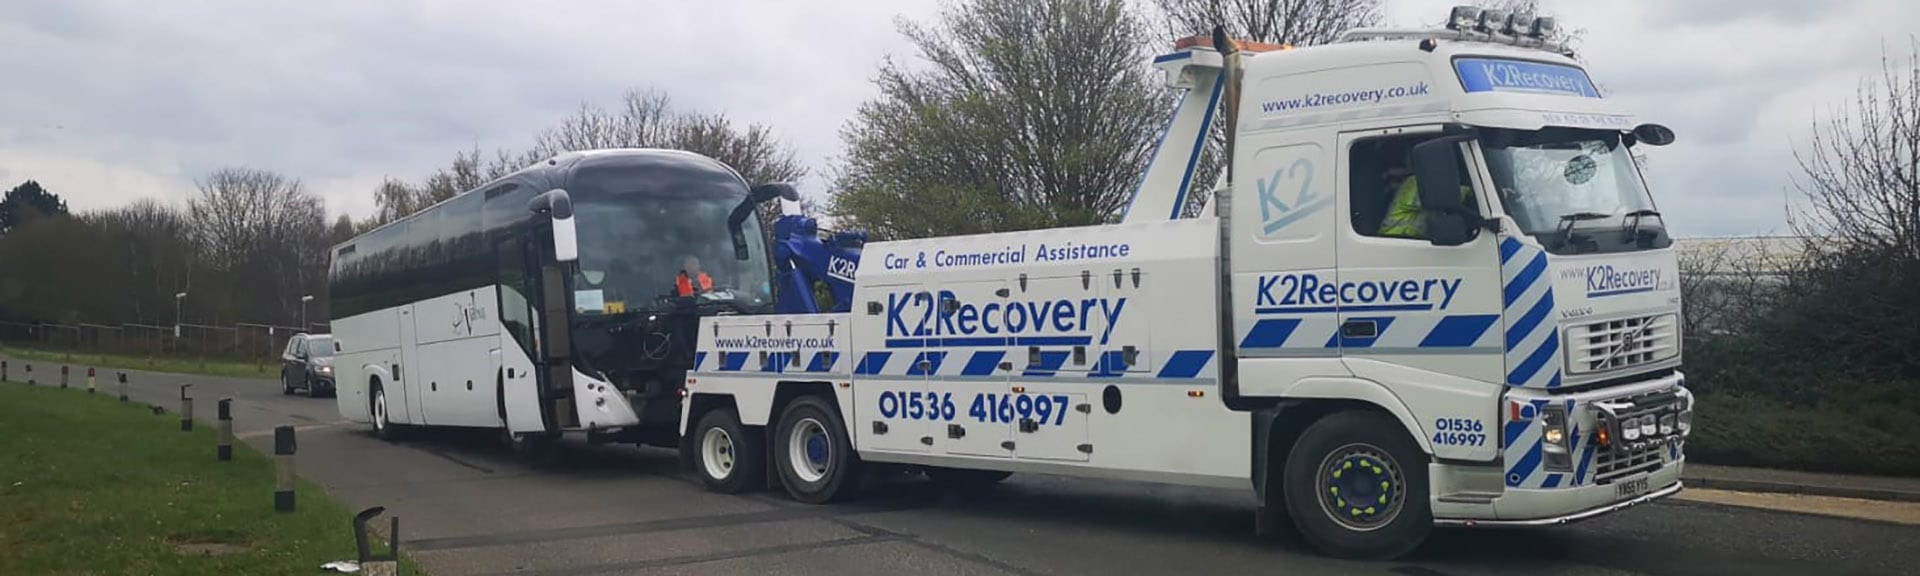 Commercial Vehicle Repair - K2 recovery